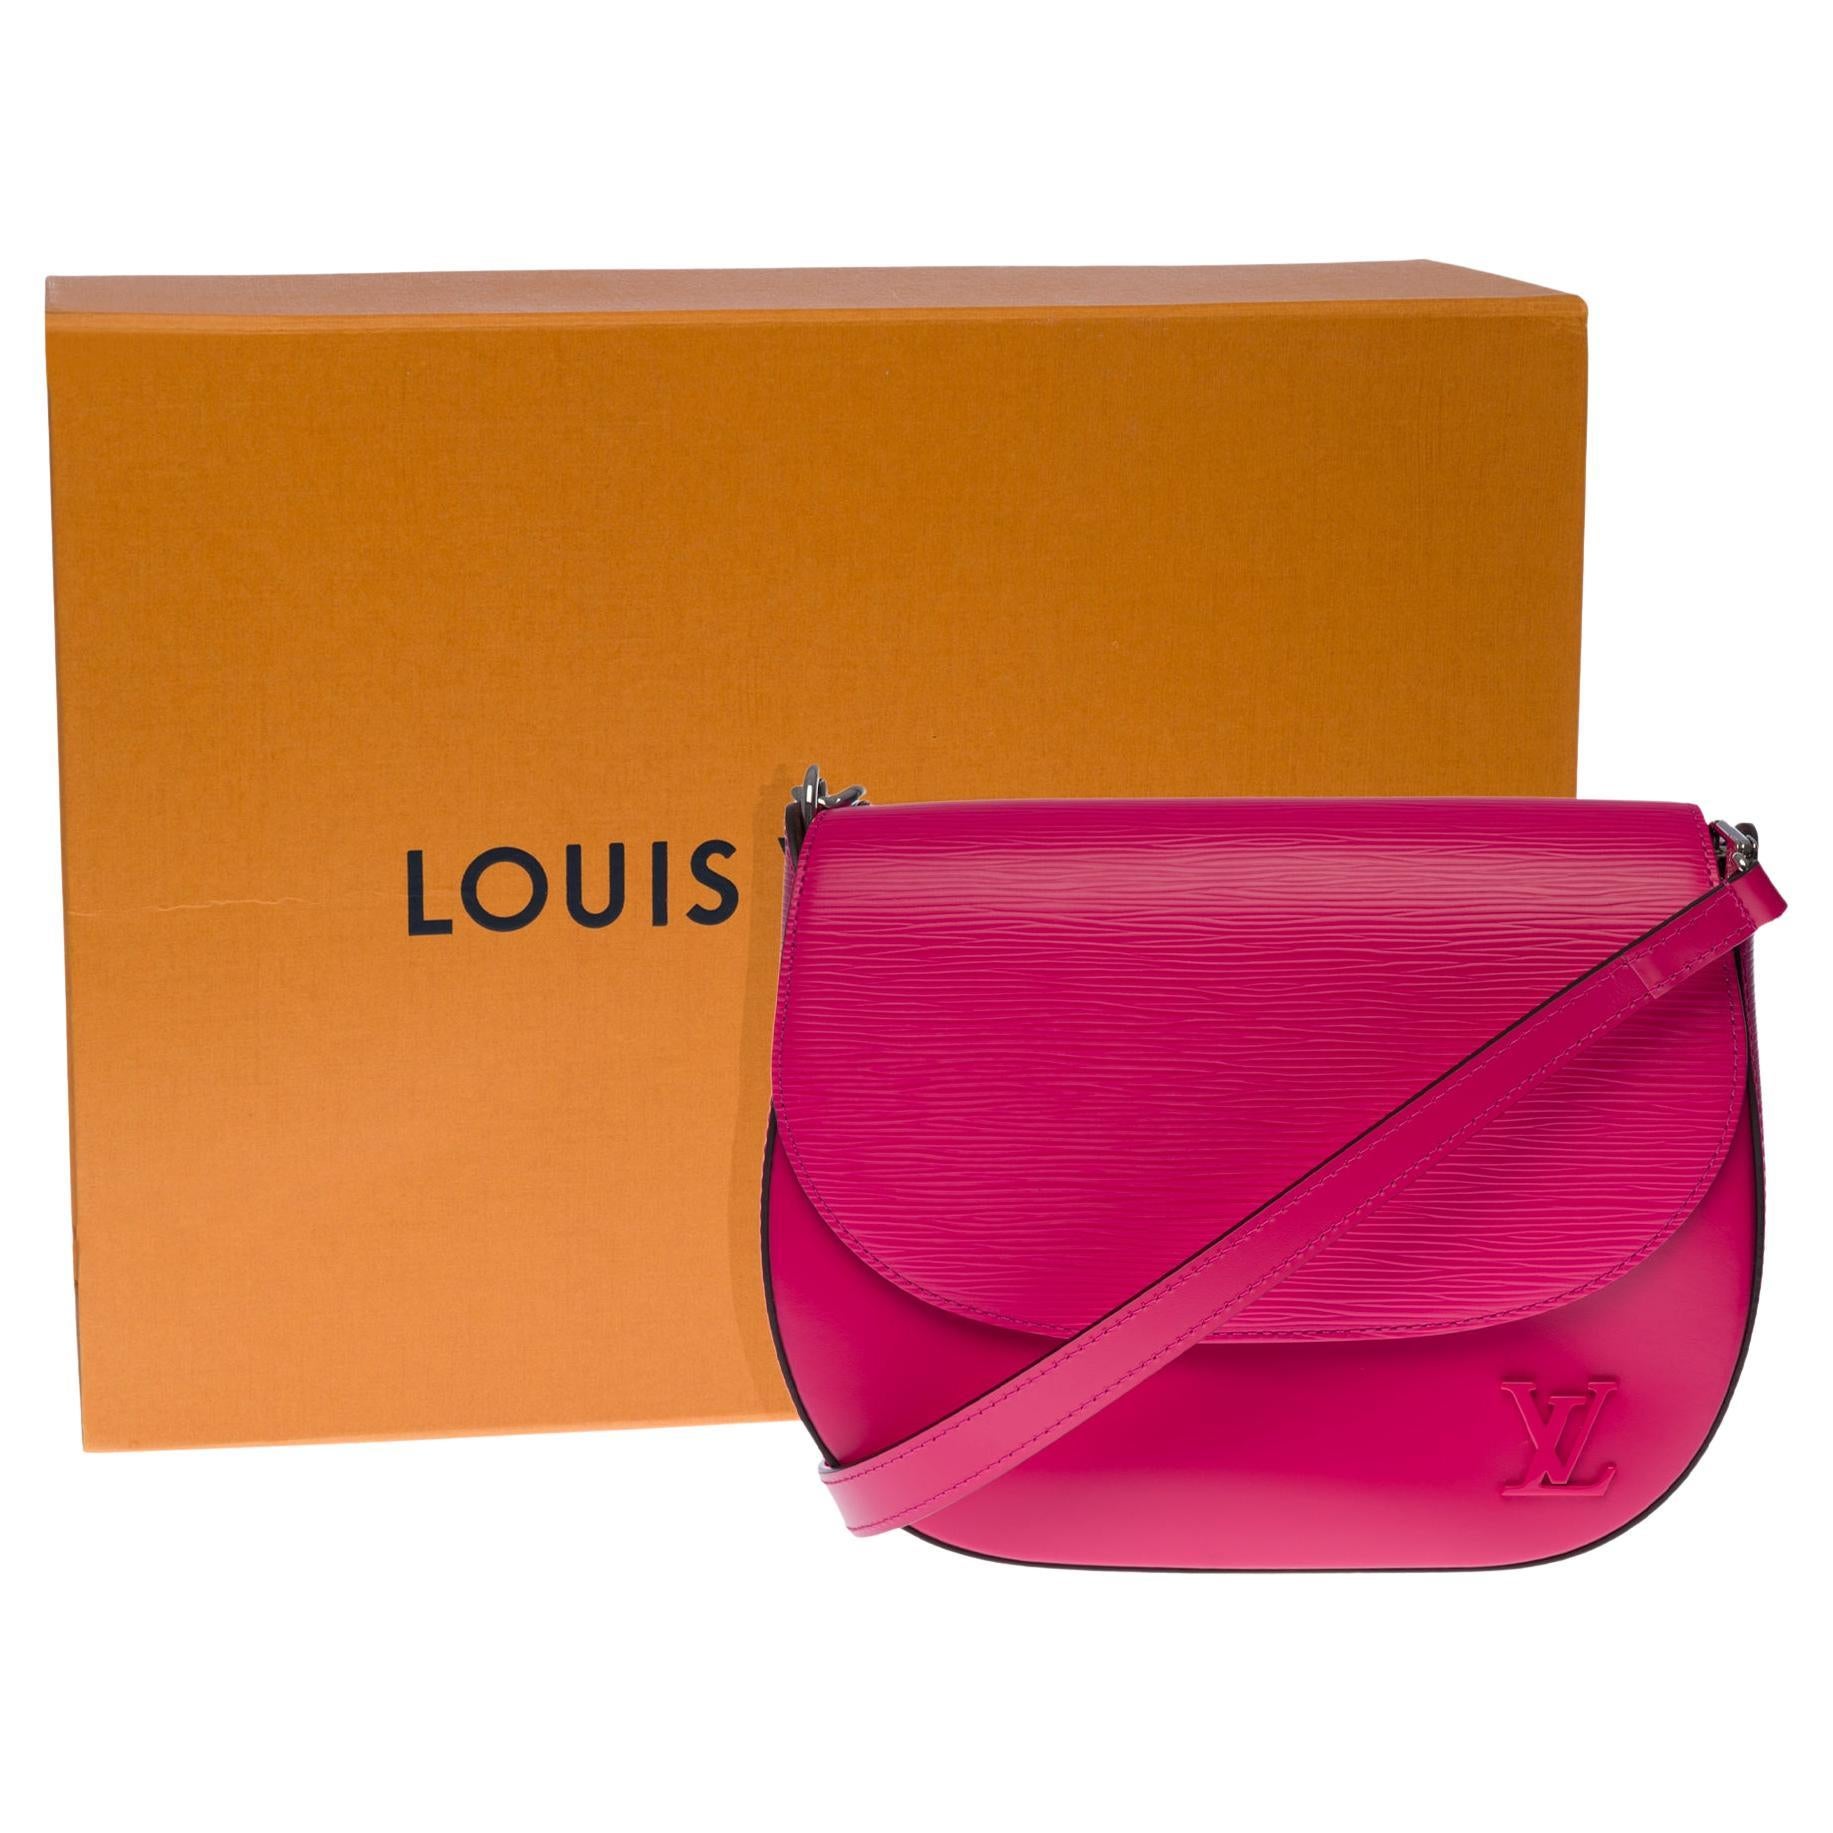 Very Chic Louis Vuitton Luna shoulder bag in Pink epi leather leather, SHW